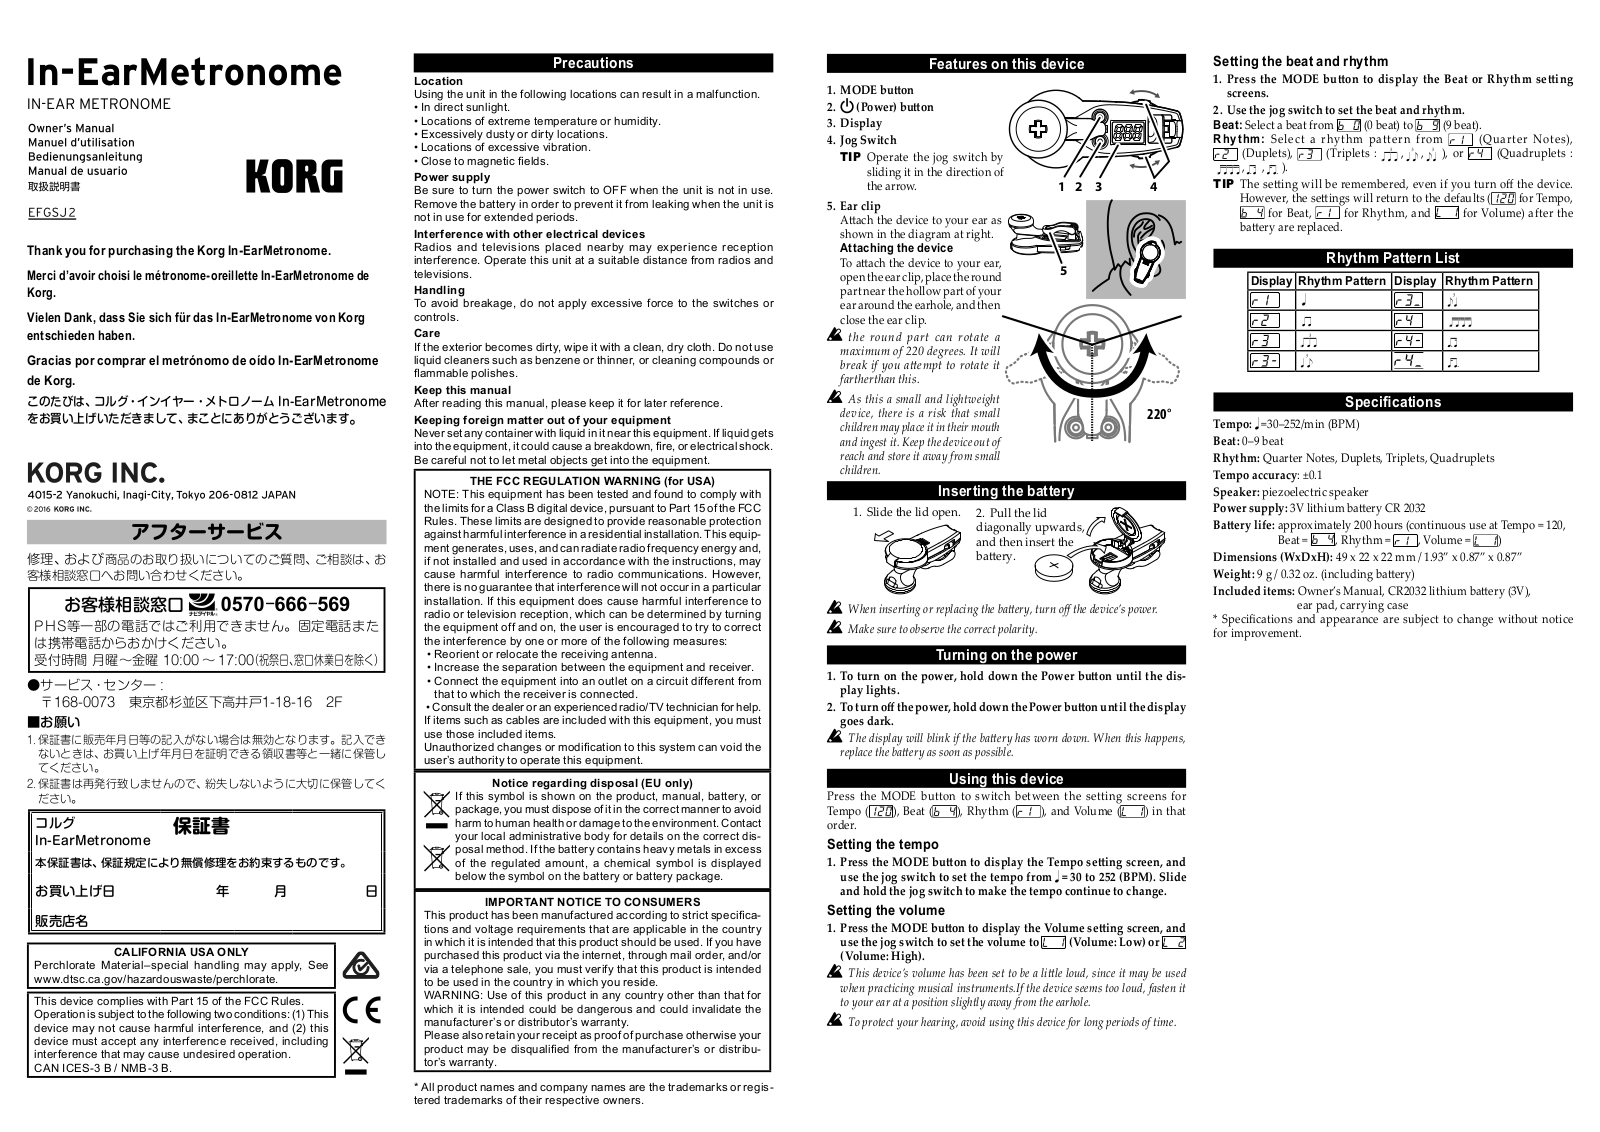 Korg IE-1M, In-Ear Metronome Owner's Manual